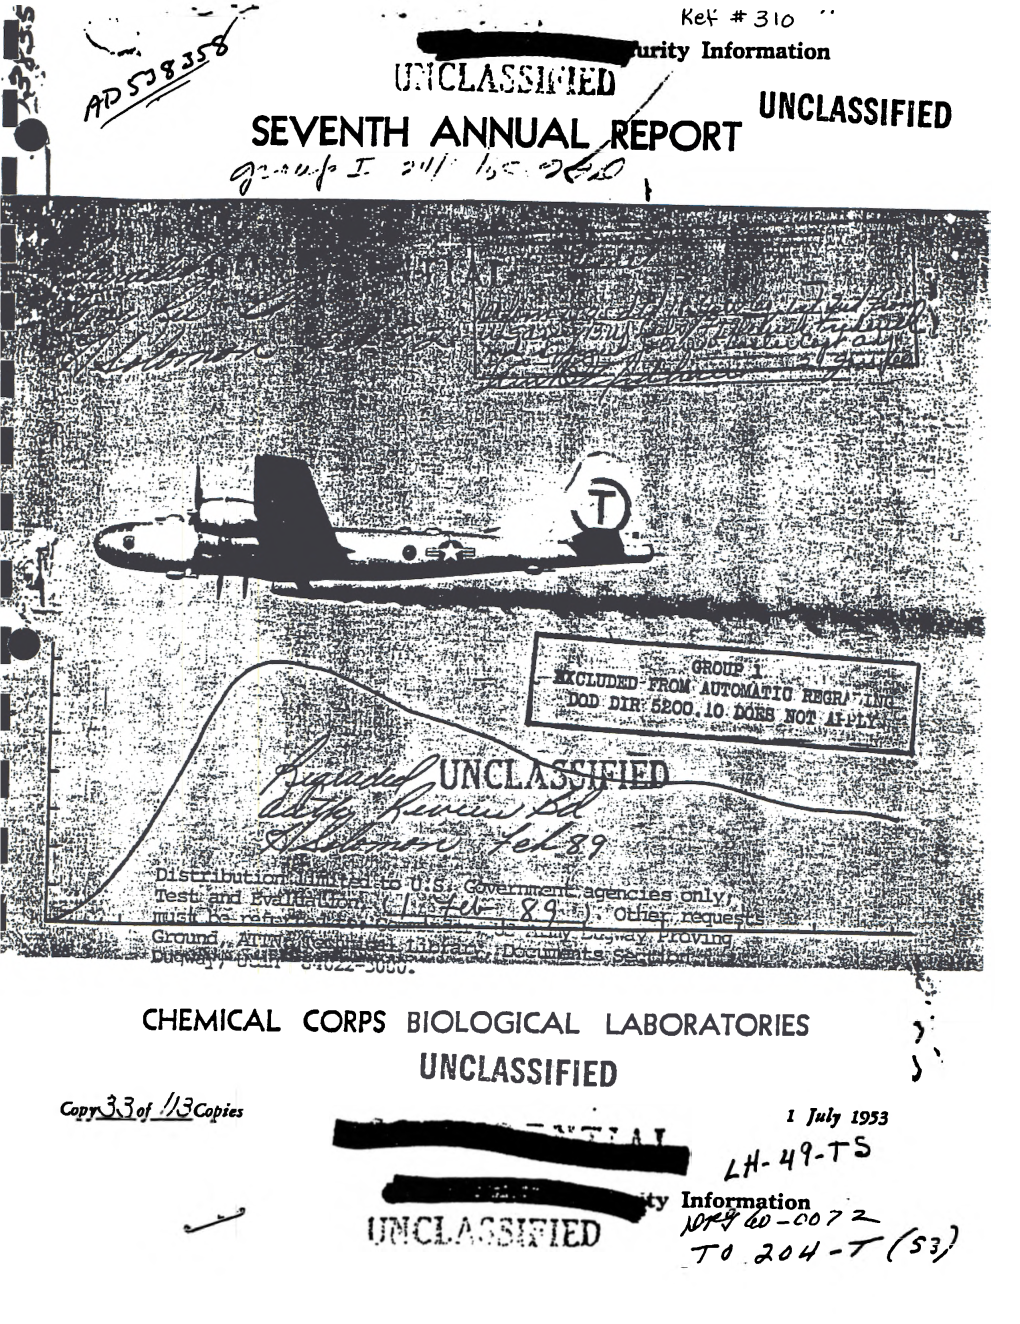 CHEMICAL CORPS BIOLOGICAL LABORATORIES , UNCLASSIFIED I ' Copr3 \% / O Scc^Ies 1 Ju Ly 1933